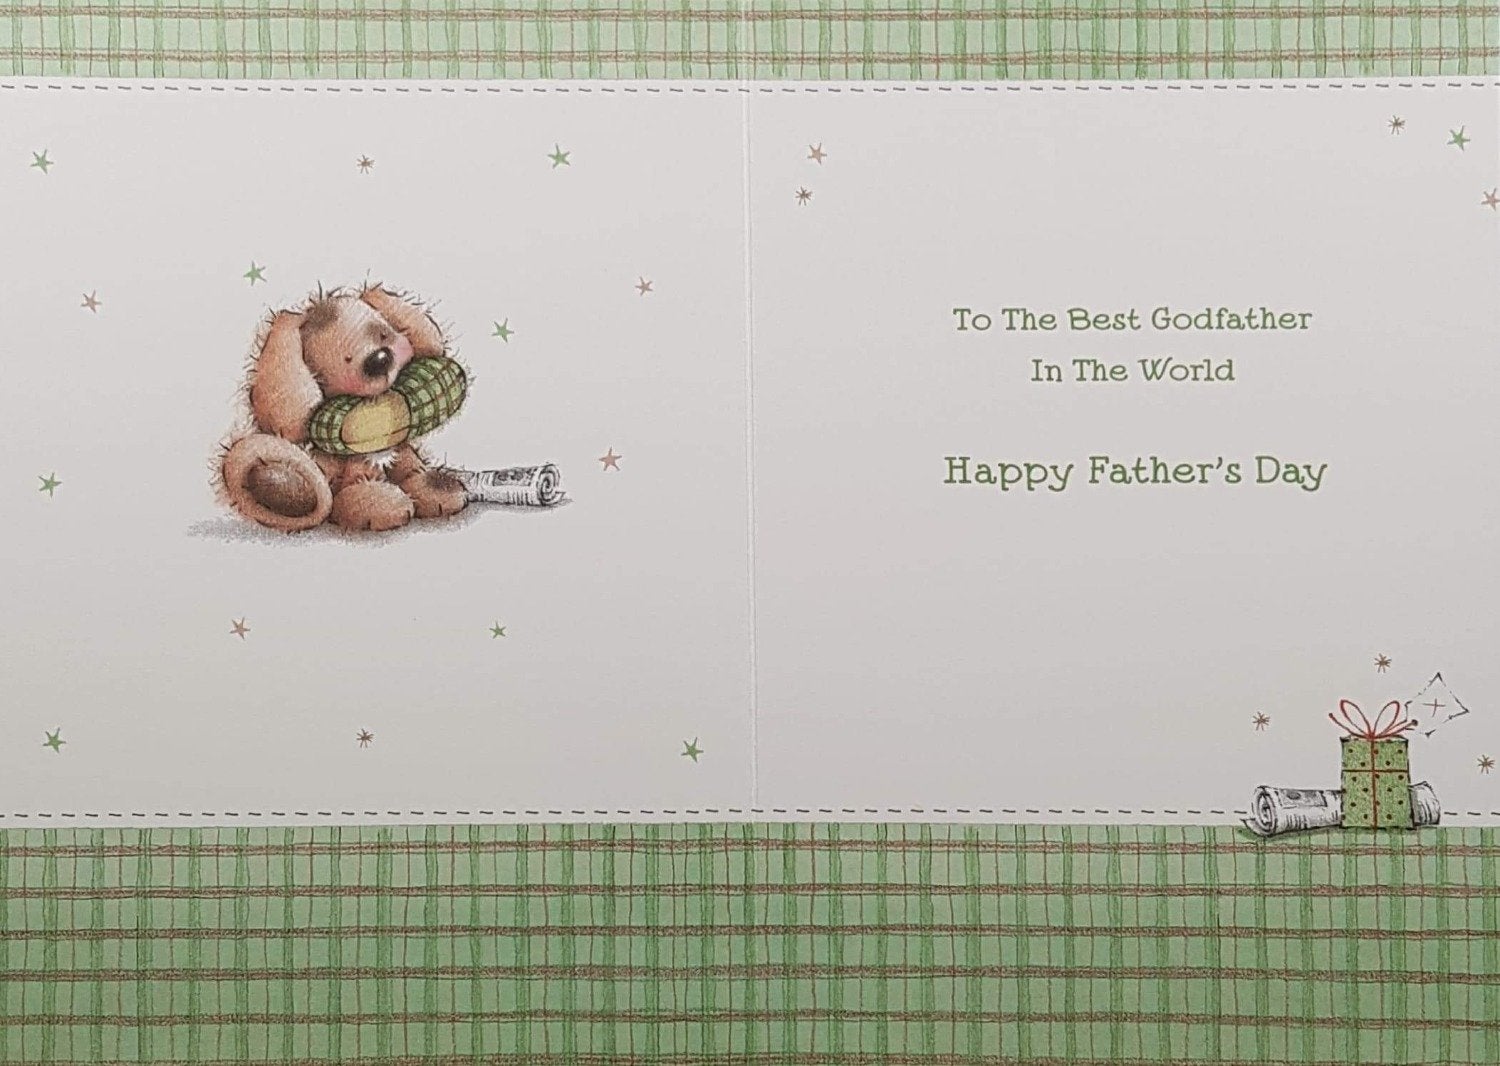 Fathers Day Card - Godfather / Love And Hugs & Puppy